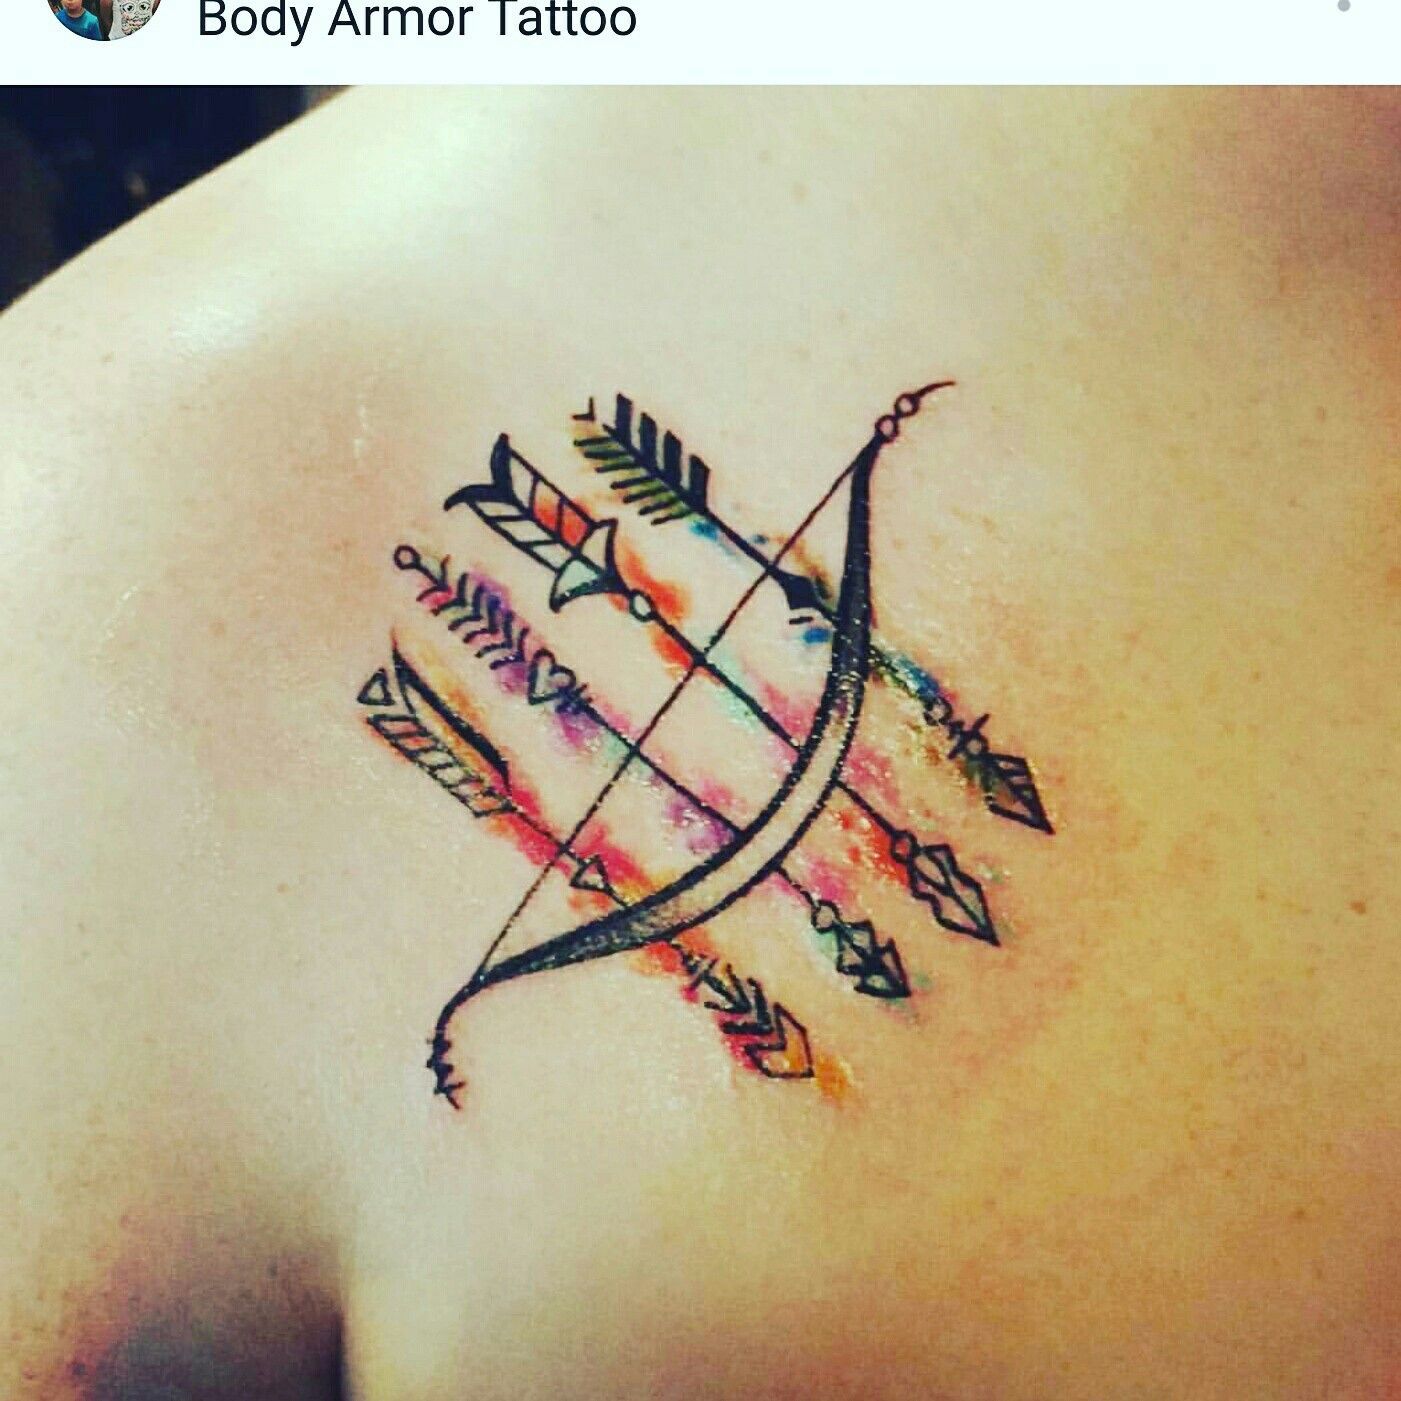 Love my new arrow tattoo. Represents each family member all headed in the same direction with the same focus and goals.